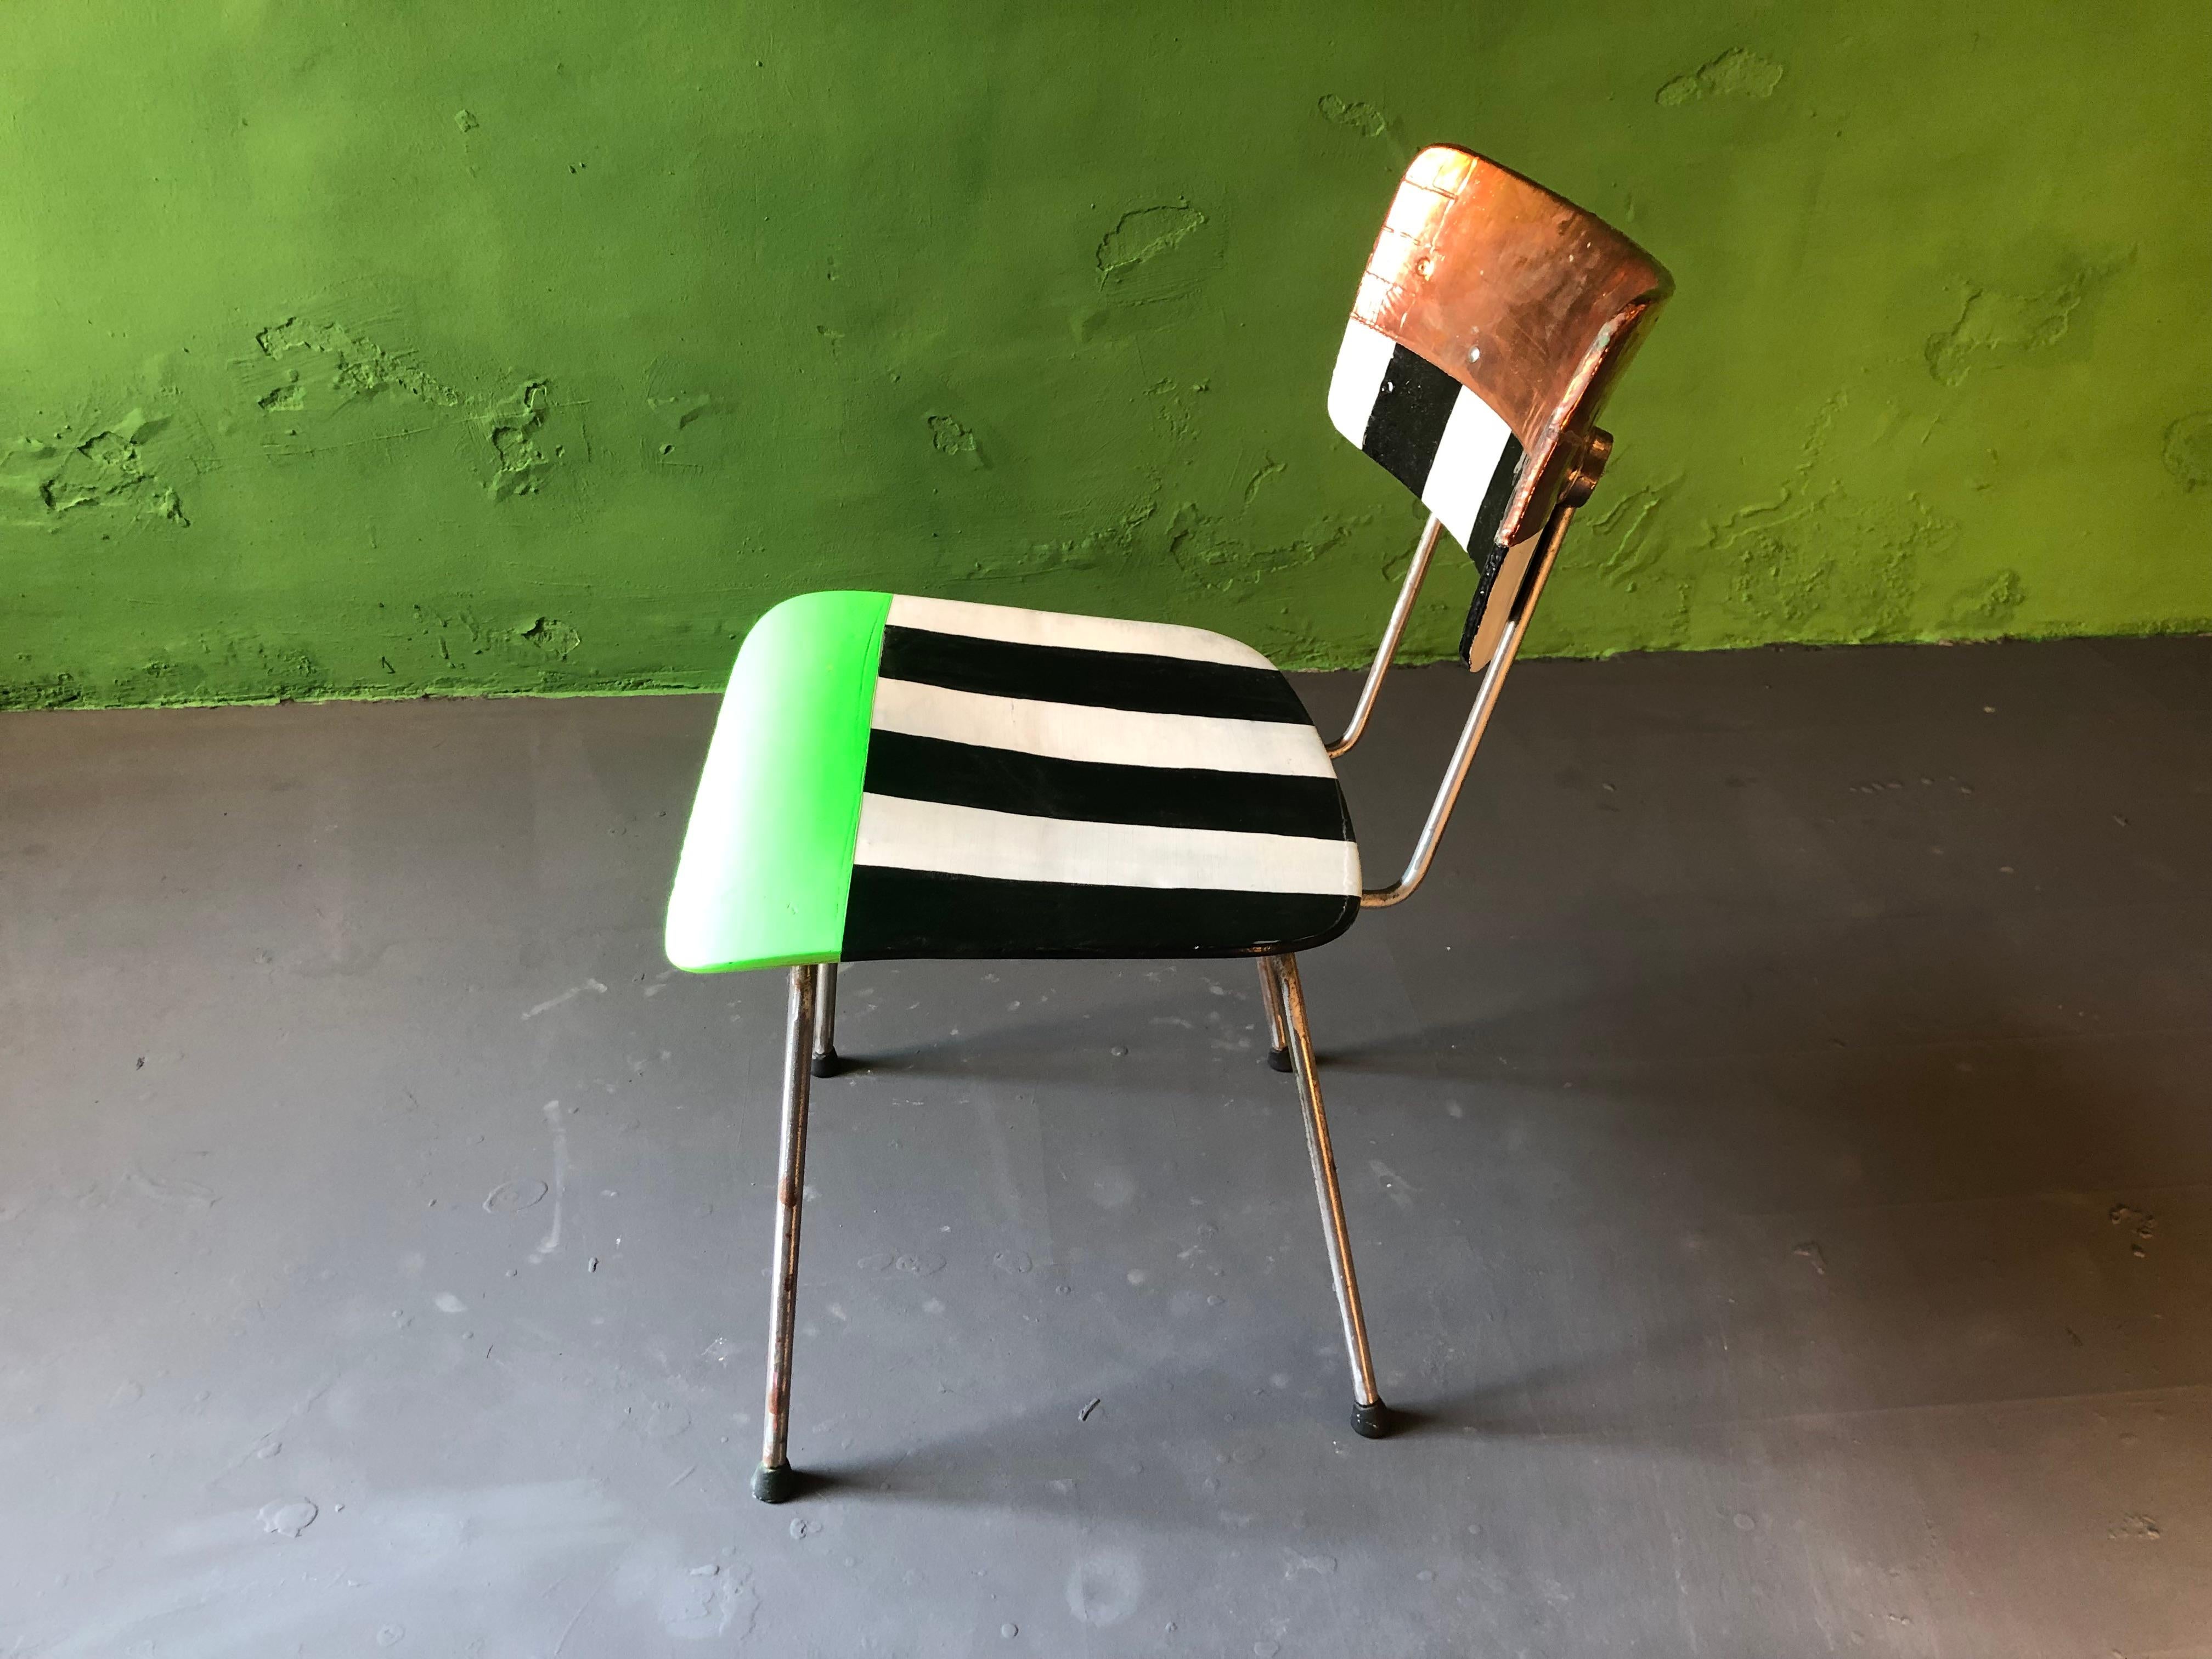 Wim Rietveld chair transformed by Markus Friedrich Staab 2021, hand-painted, multi-lacquered in high gloss varnish, galvanized backrest.
Like other dutch Designers, Rietveld was very inspired by the Eames couple which you can see in this work.